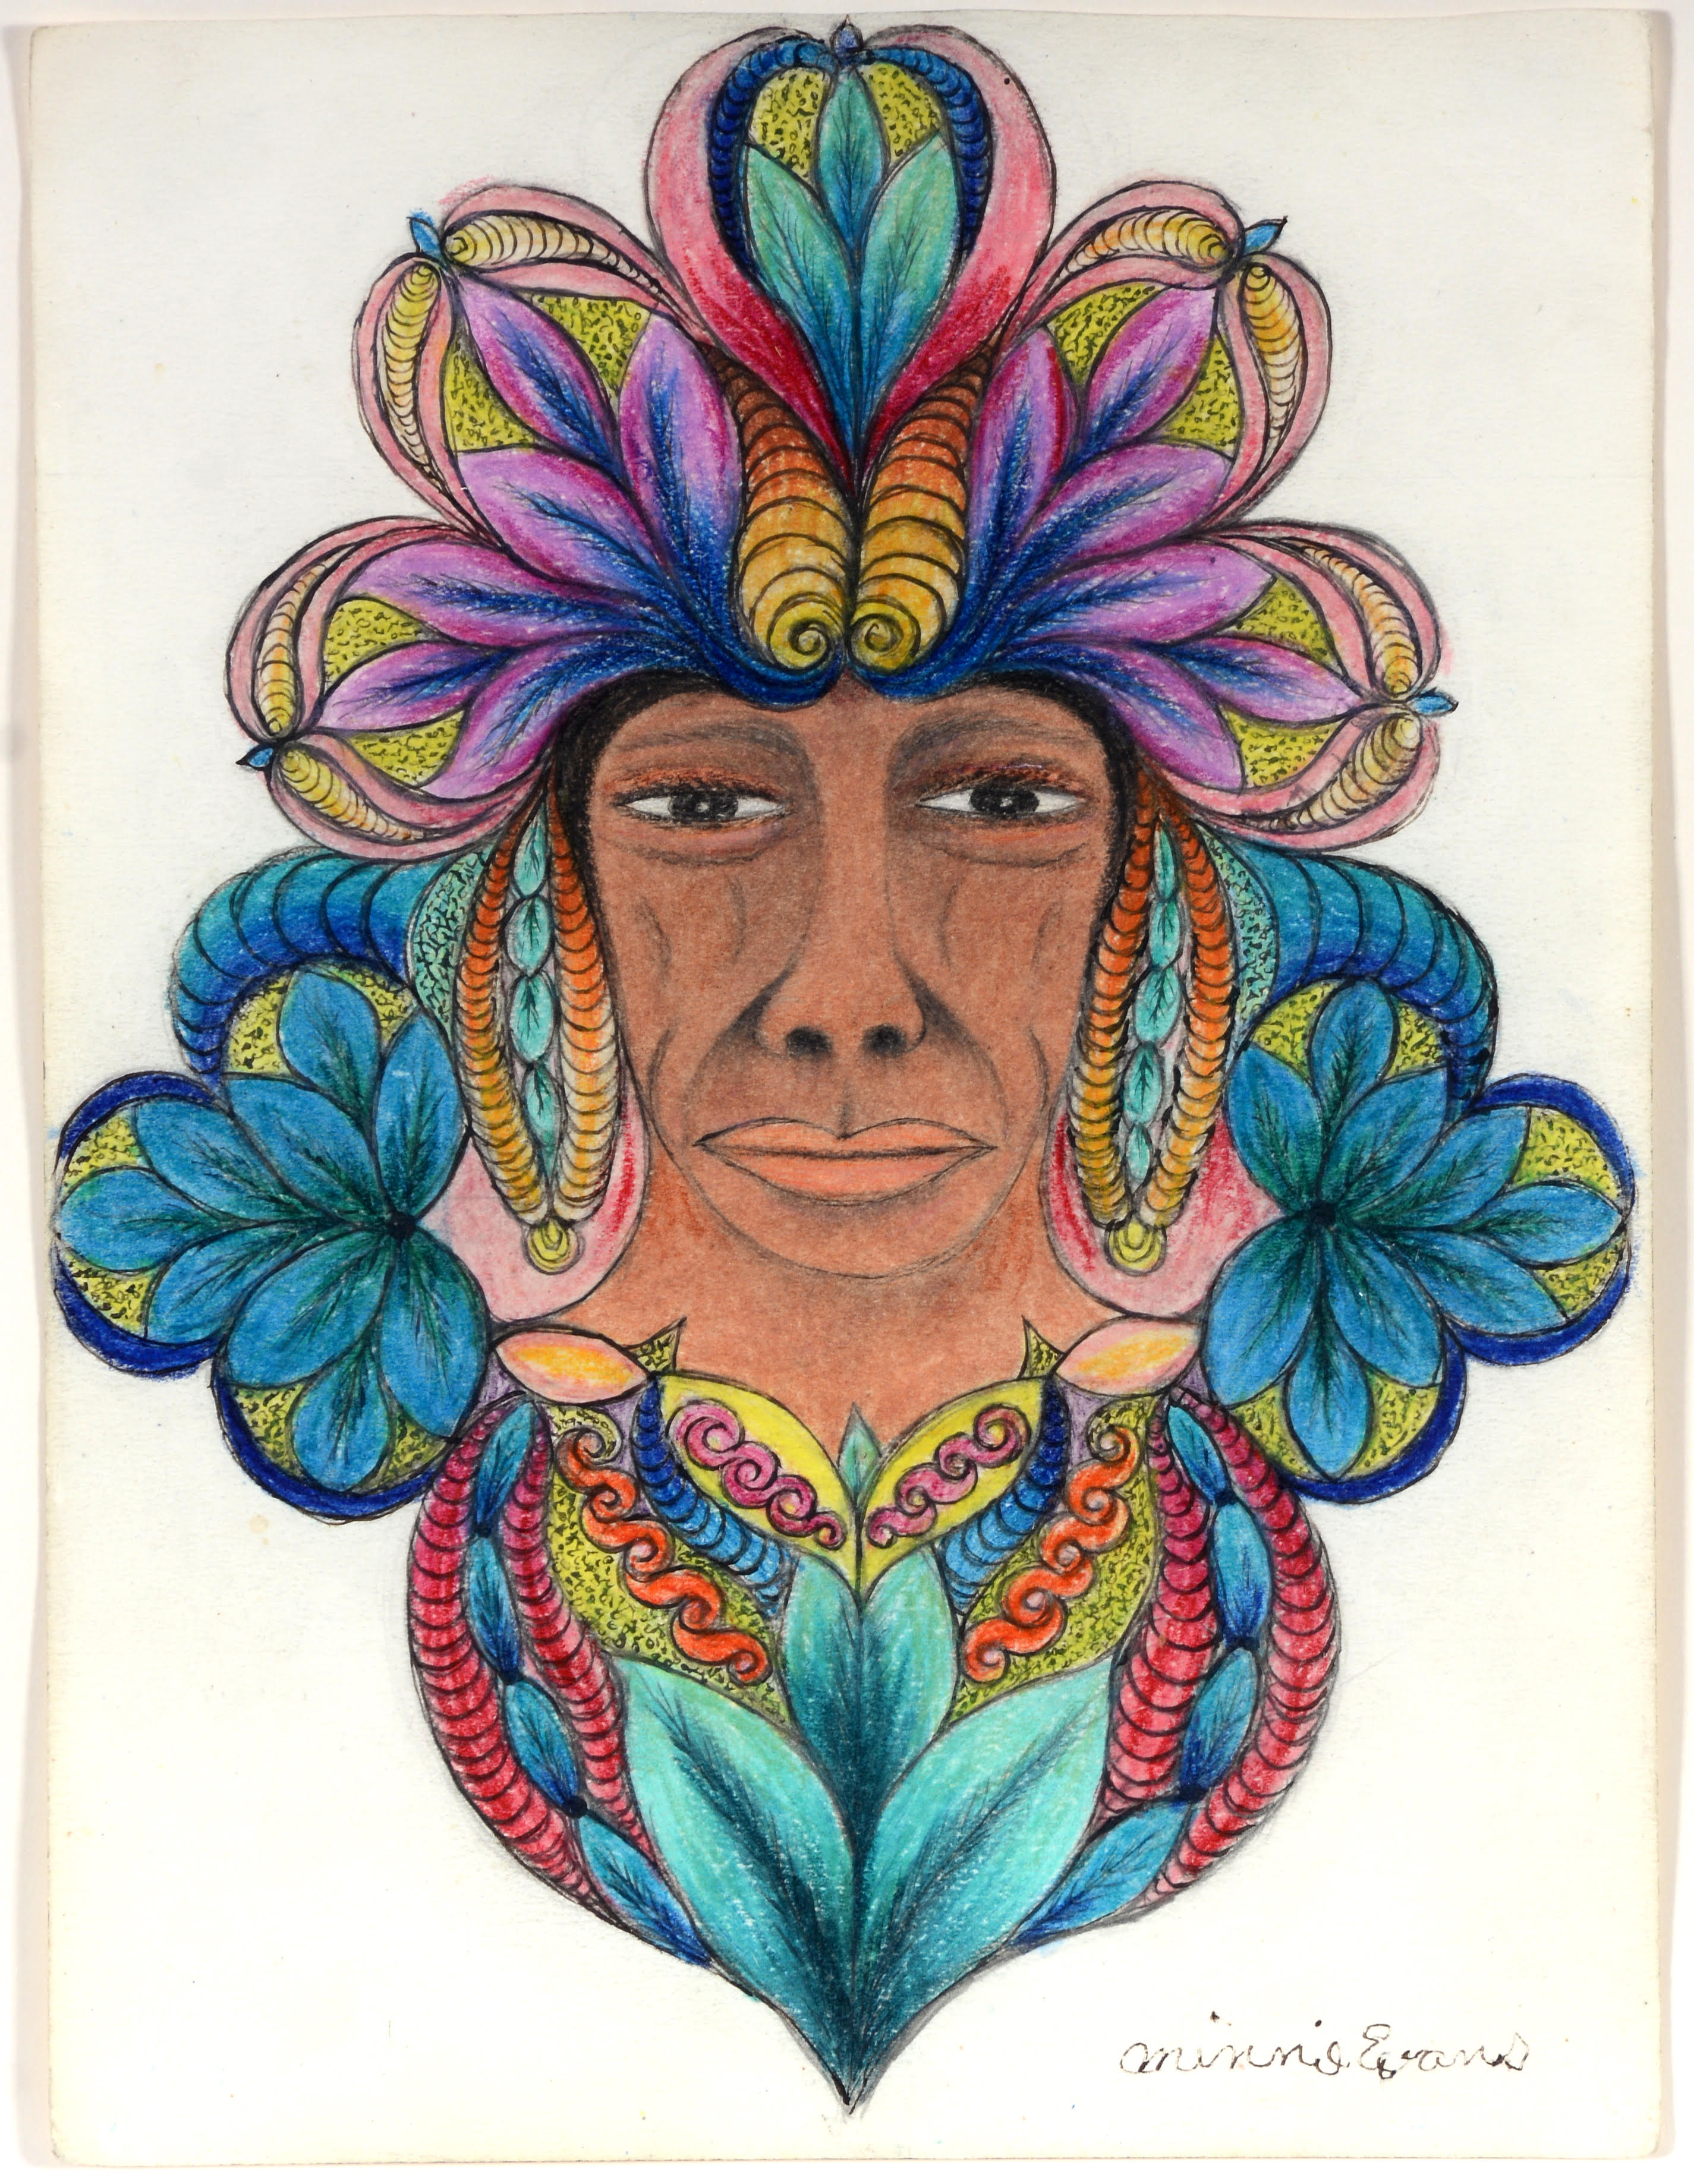 A circa 1960s portrait by Minnie Evans shows a copper-colored face of indeterminate gender crowned with an elaborate, colorful headdress and surrounded by flourishing plants. 